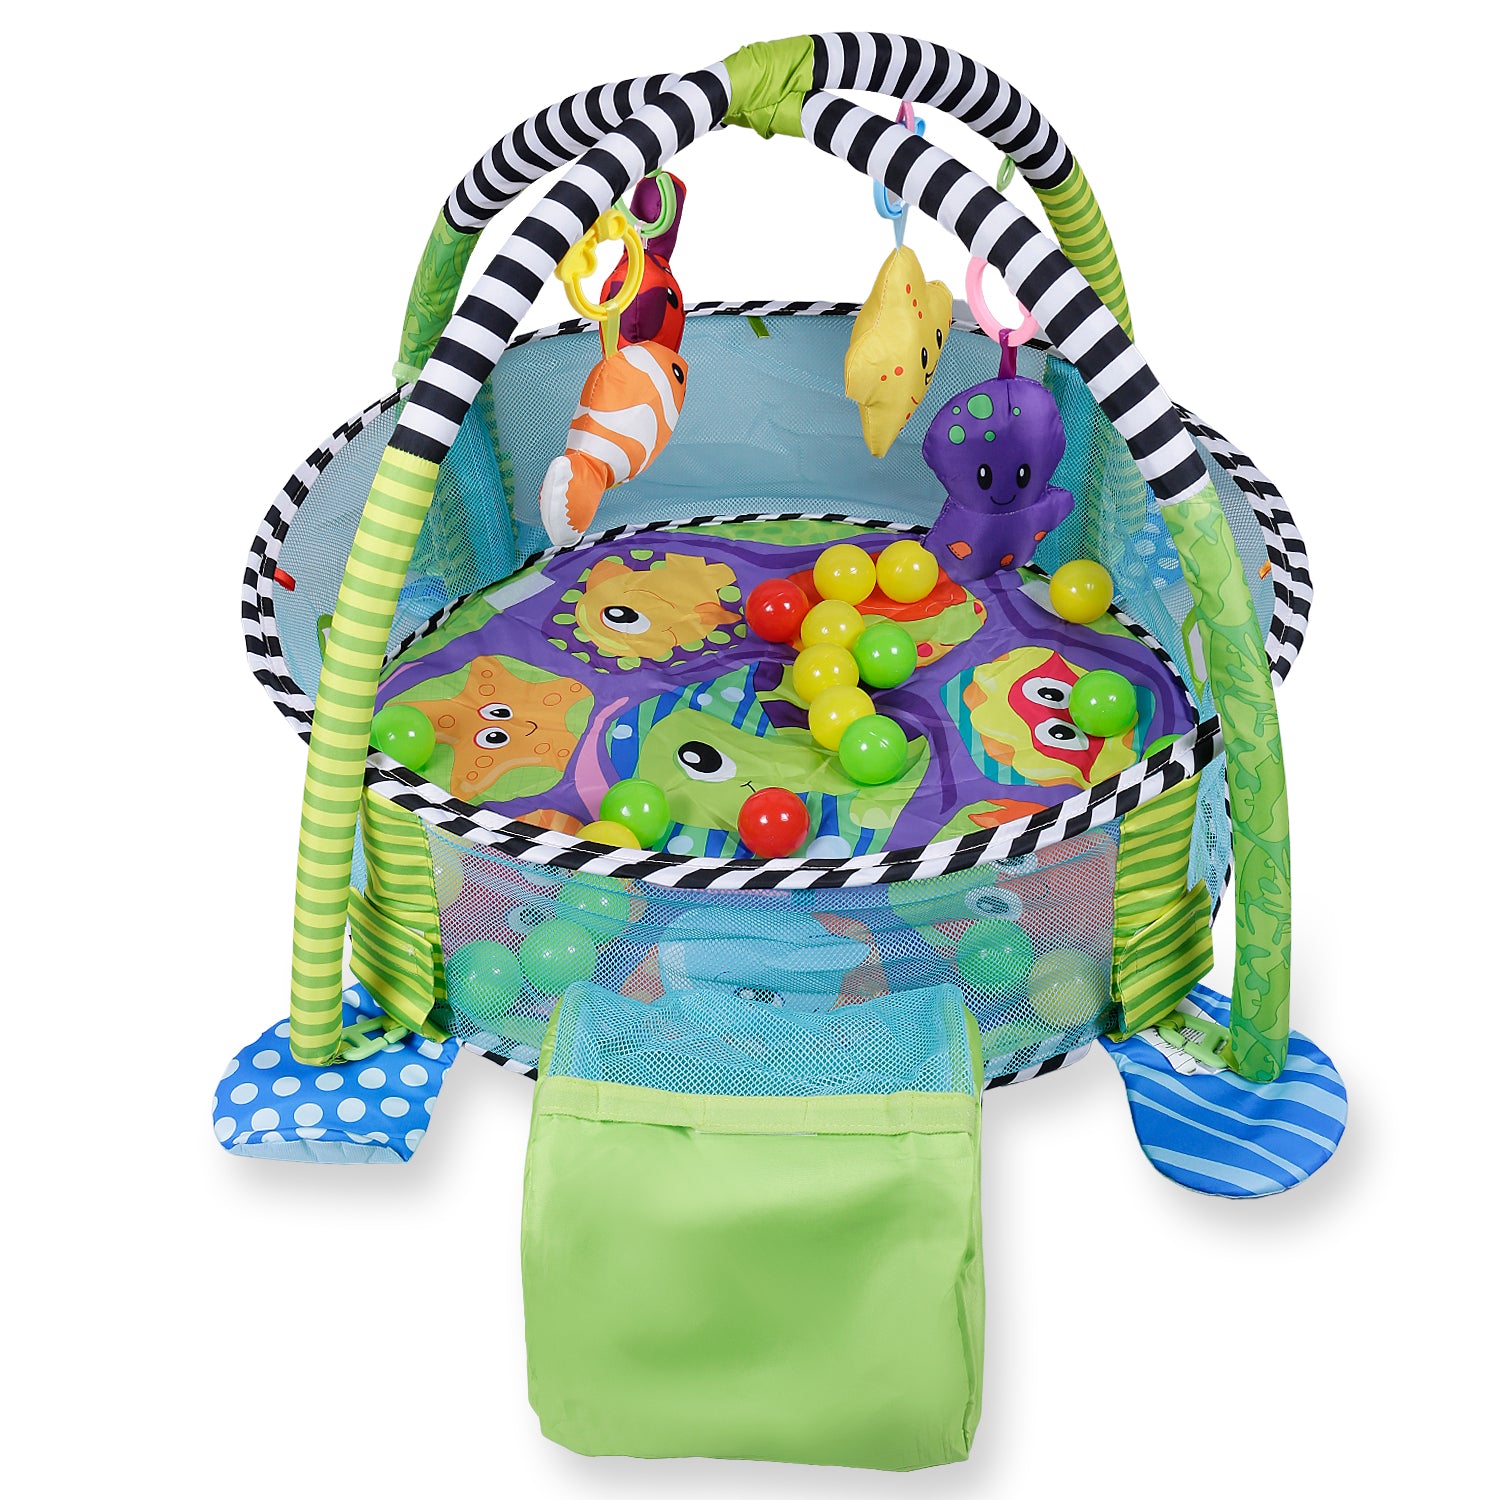 Turtle Infant Play Mat Activity Gym With Hanging Toys And Balls - Green